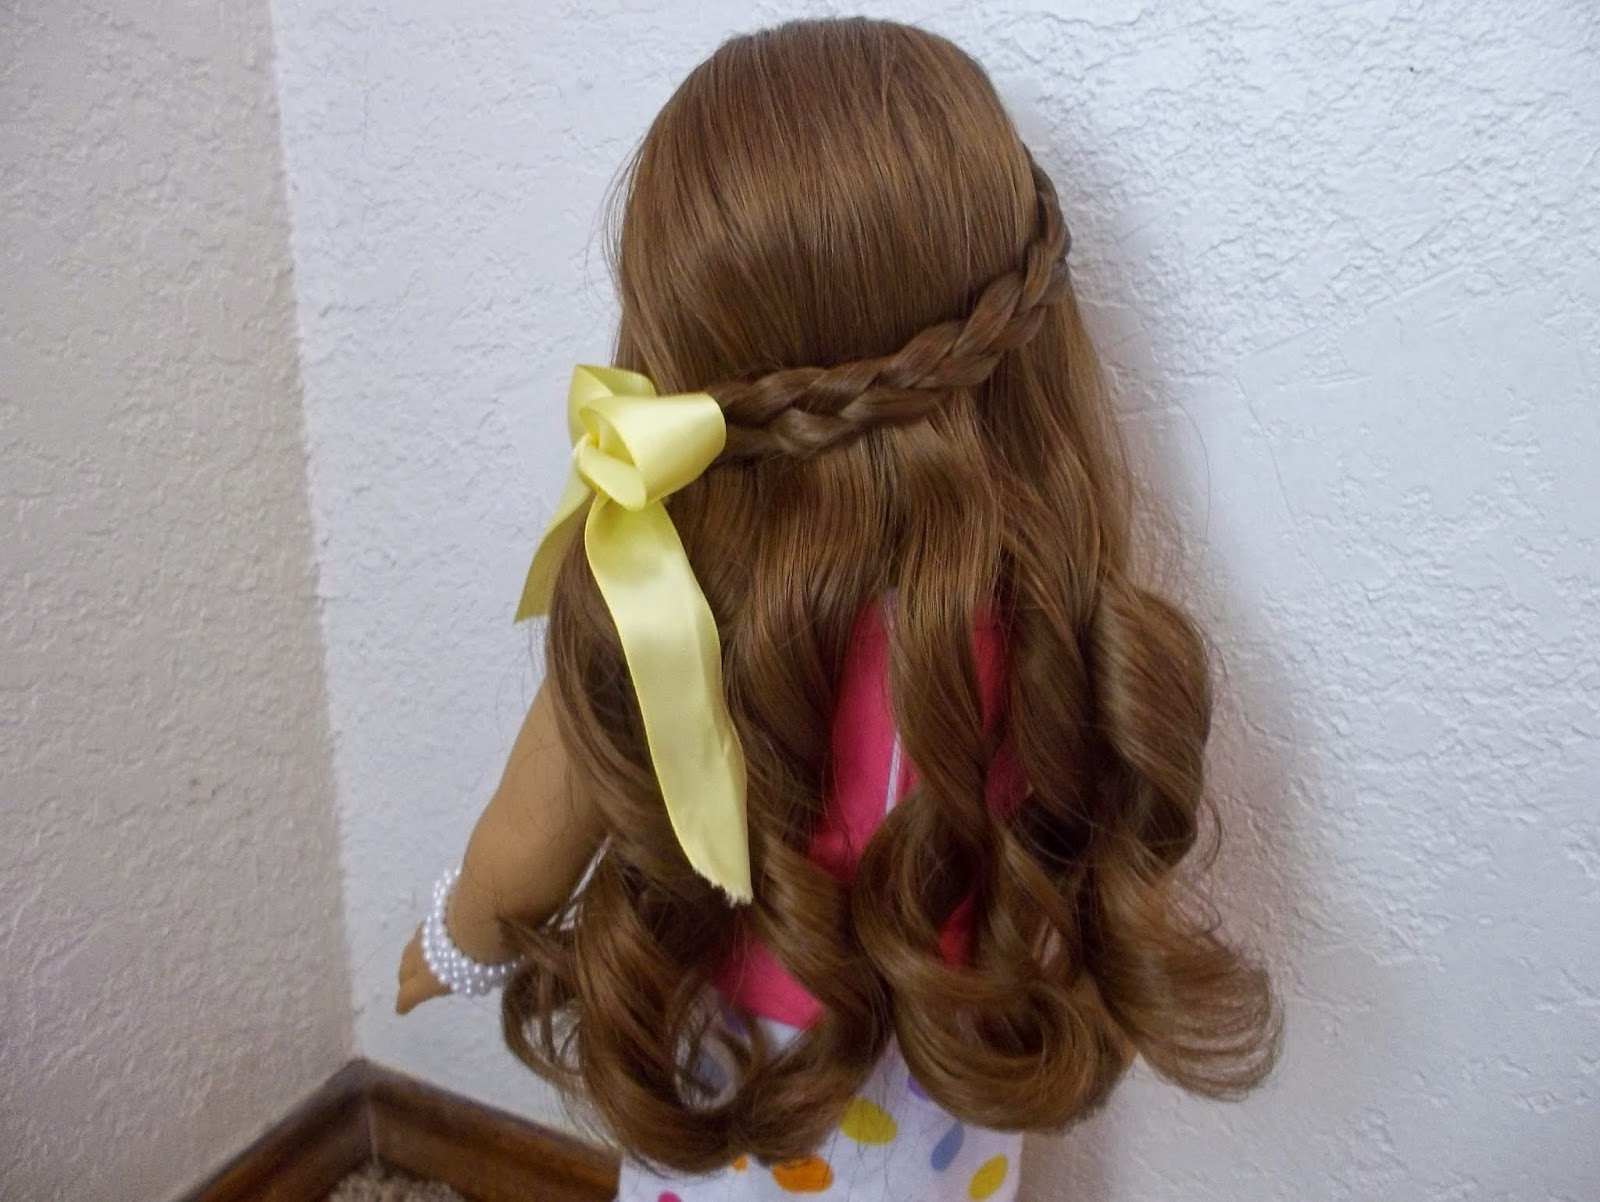 Cute Doll Hairstyles
 Cute American Girl Doll Hairstyles trends hairstyle